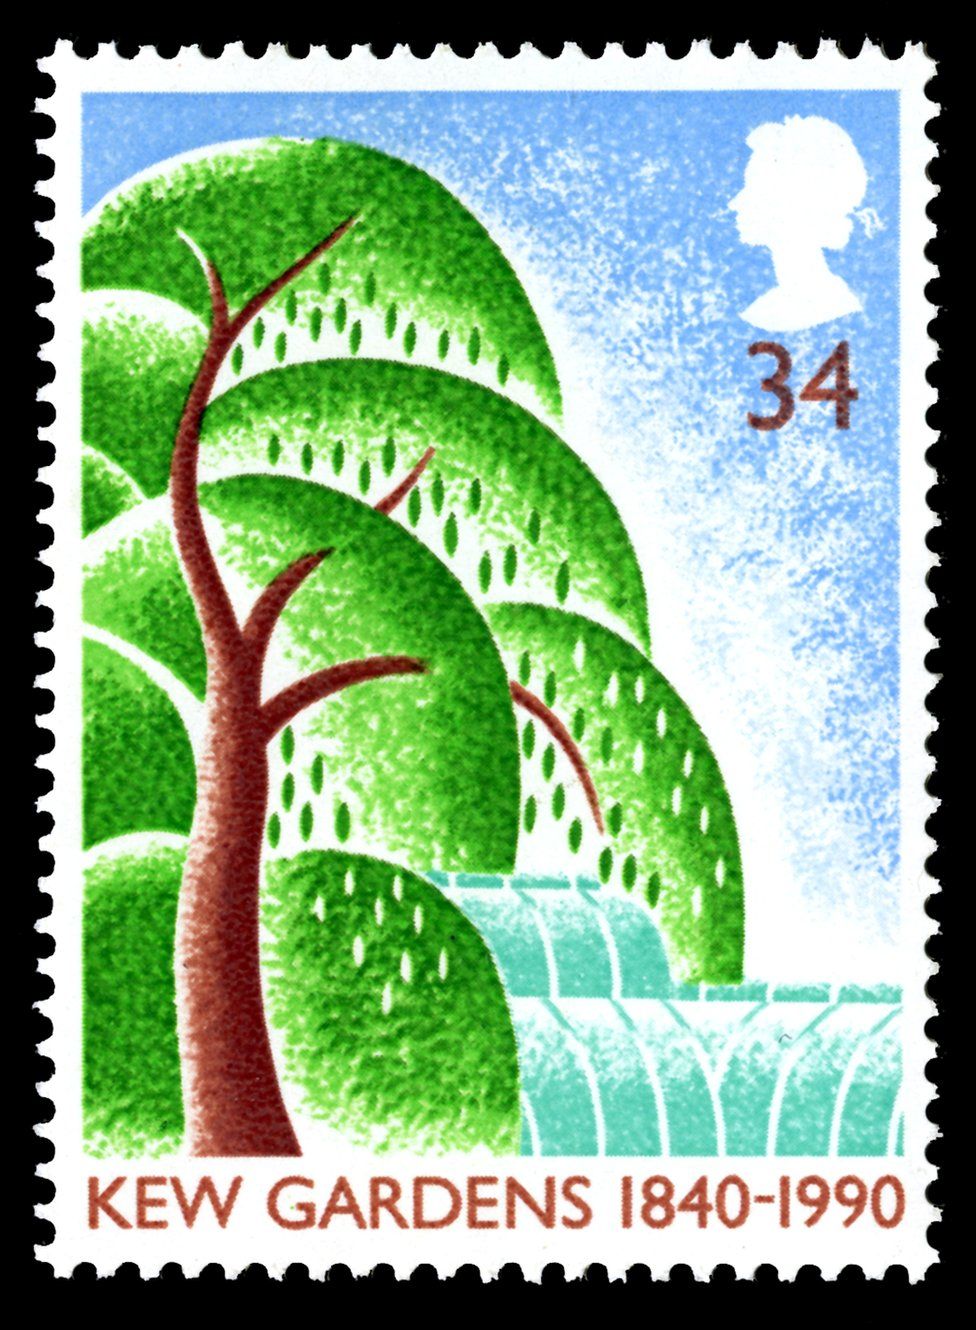 Paul Leith stamp to commemorate 150th anniversary of Kew Garden